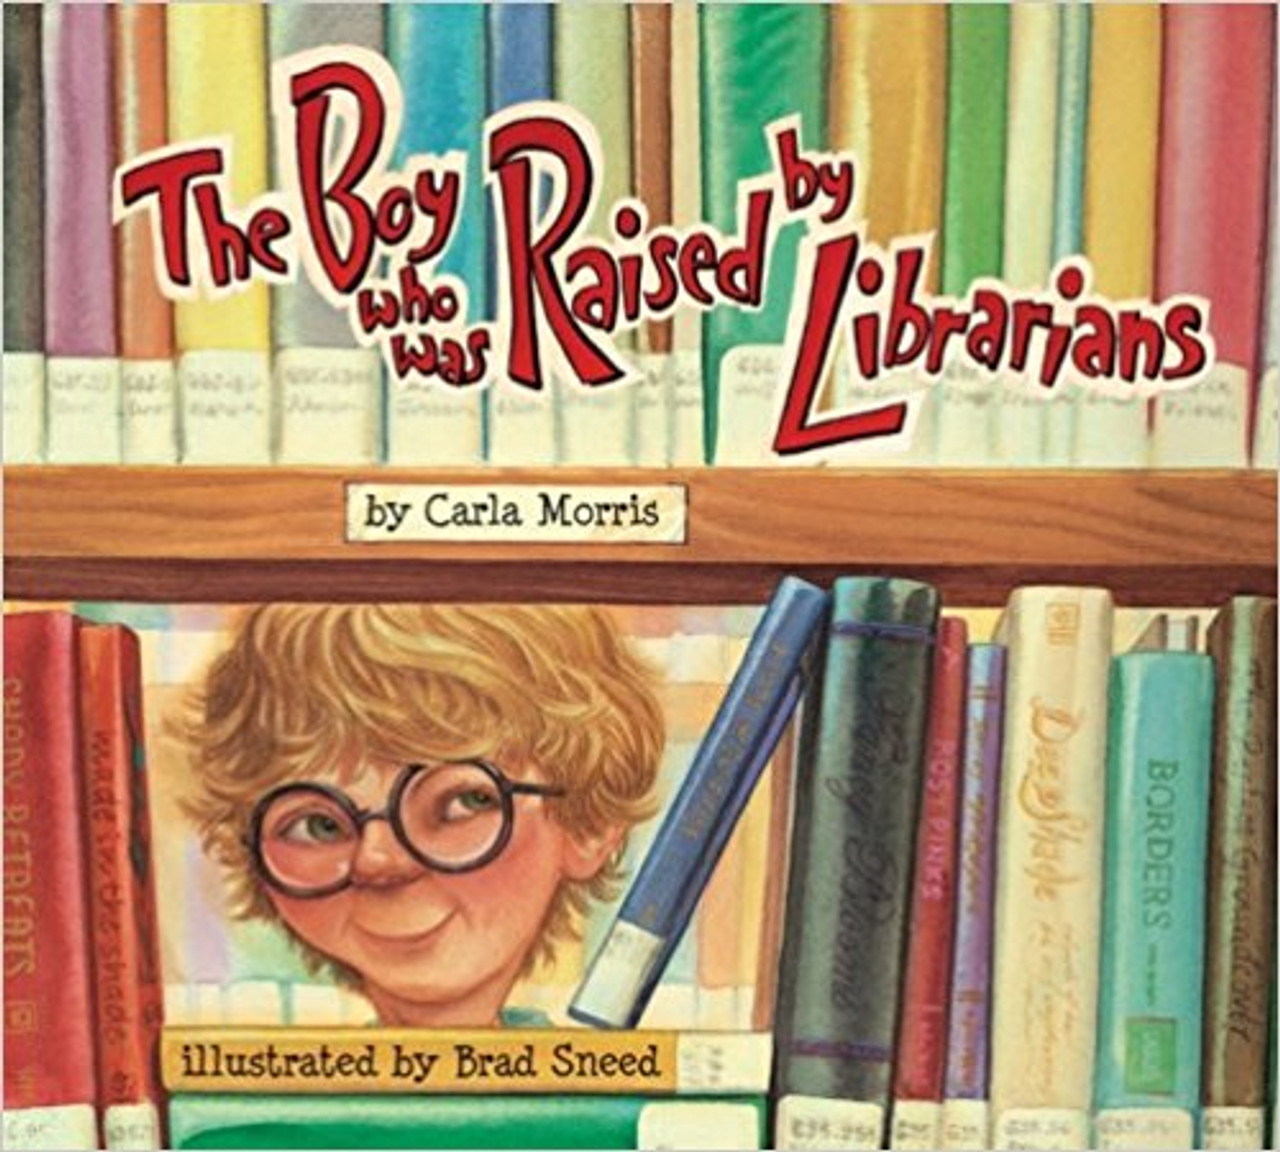  This humorous tale of a curious young boy and his single-minded quest for knowledge is a heartfelt and affectionate tribute to librarians everywhere. Full color.